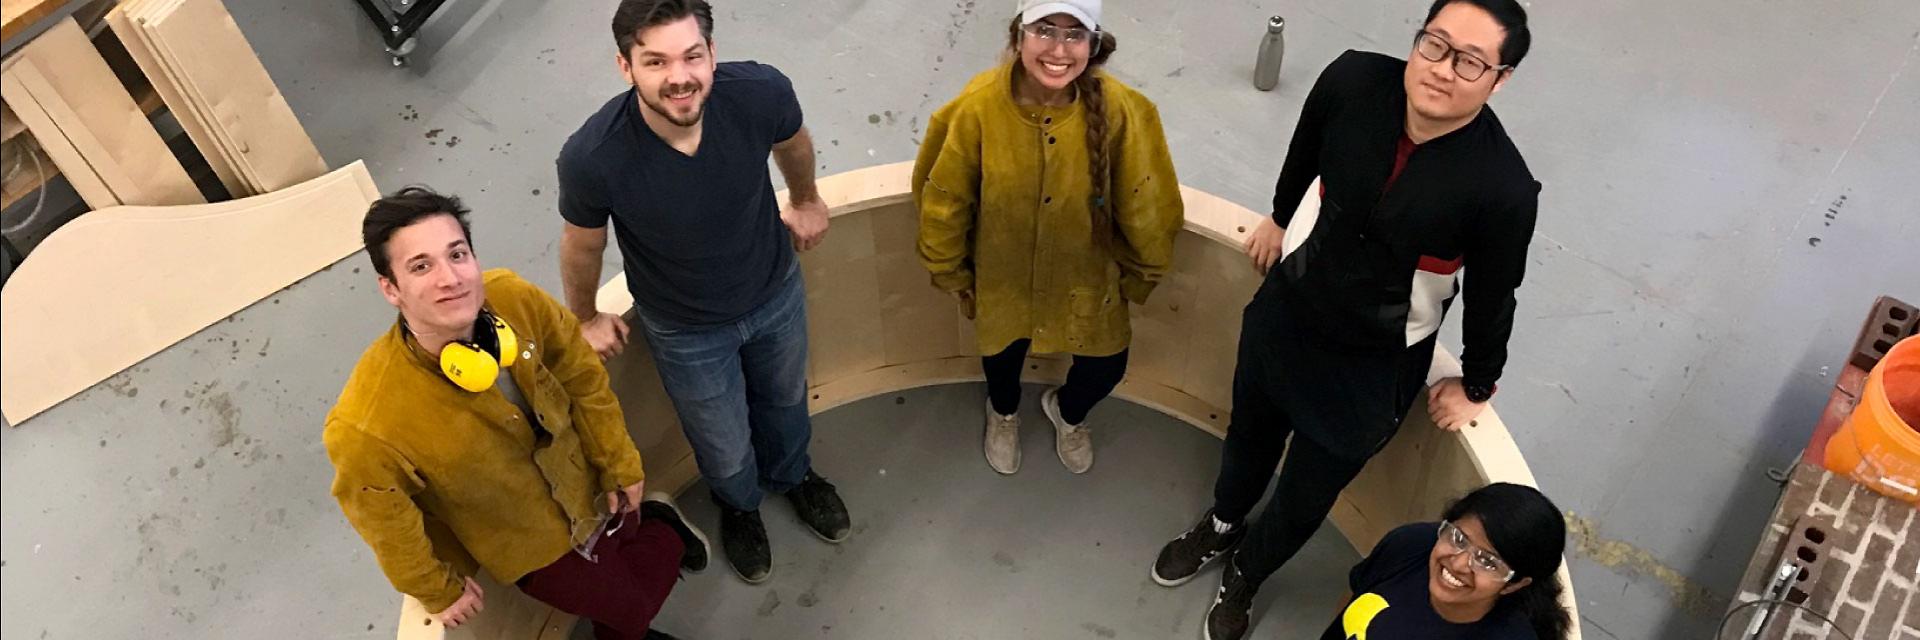 Students pose inside a gigantic wheel that they fabricated.